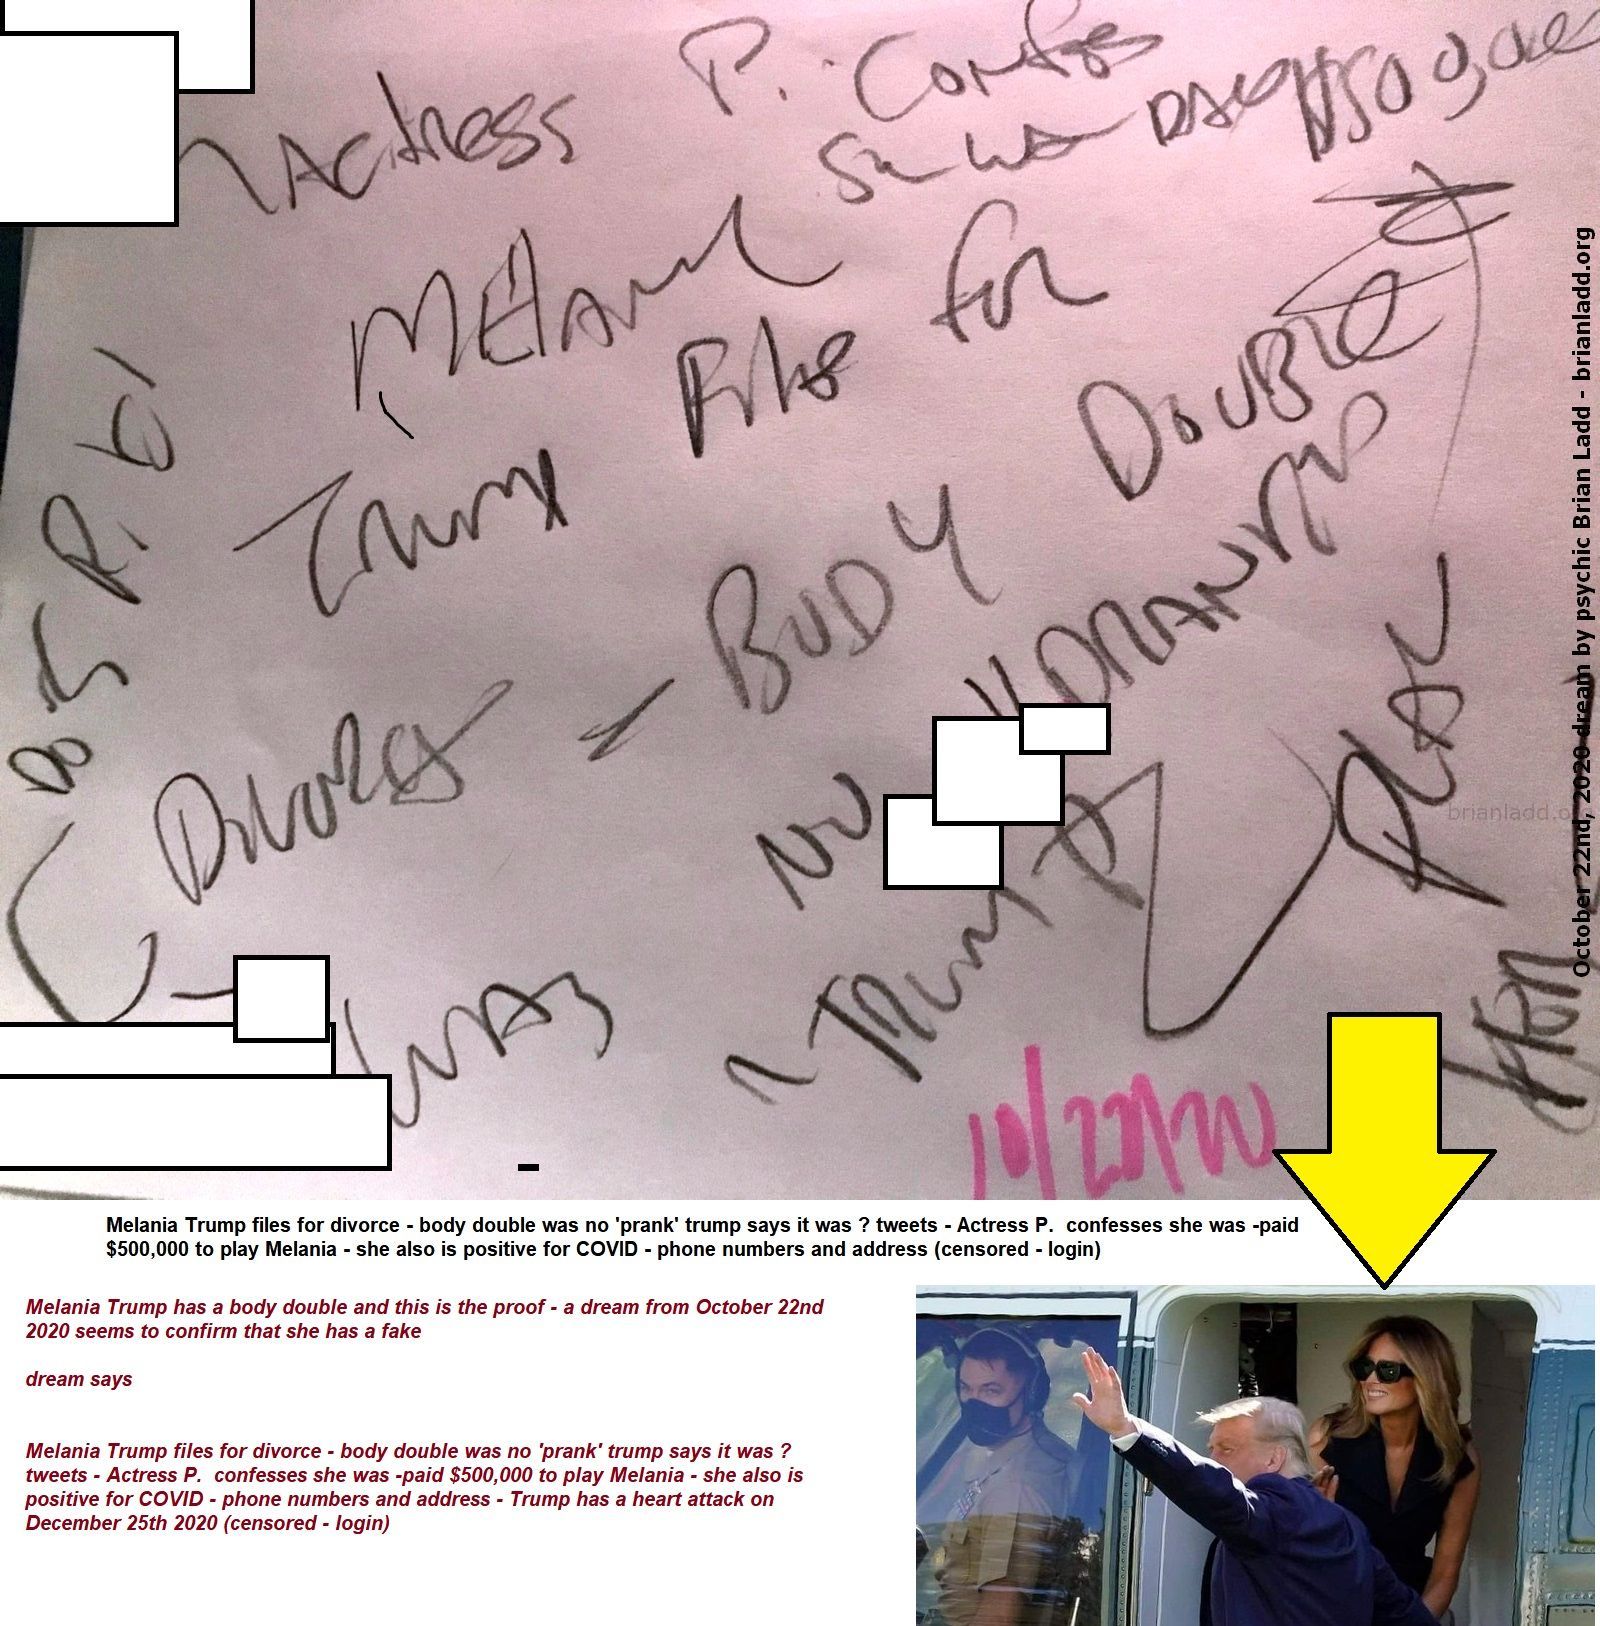 Melania Trump Has A Body Double And This Is The Proof A Dream From October 22Nd 2020 Seems To Confirm That She Has A Fak...
Melania Trump Has A Body Double And This Is The Proof - A Dream From October 22nd 2020 Seems To Confirm That She Has A Fake  Dream Says  Melania Trump Files For Divorce - Body Double Was No 'prank' Trump Says It Was ? Tweets - Actress P.  Confesses She Was -paid $500,000 To Play Melania - She Also Is Positive For Covid - Phone Numbers And Address - Trump Has A Heart Attack On December 25th, 2020 (censored - Login)  More At   https://briansprediction.com/Fake-Melania
